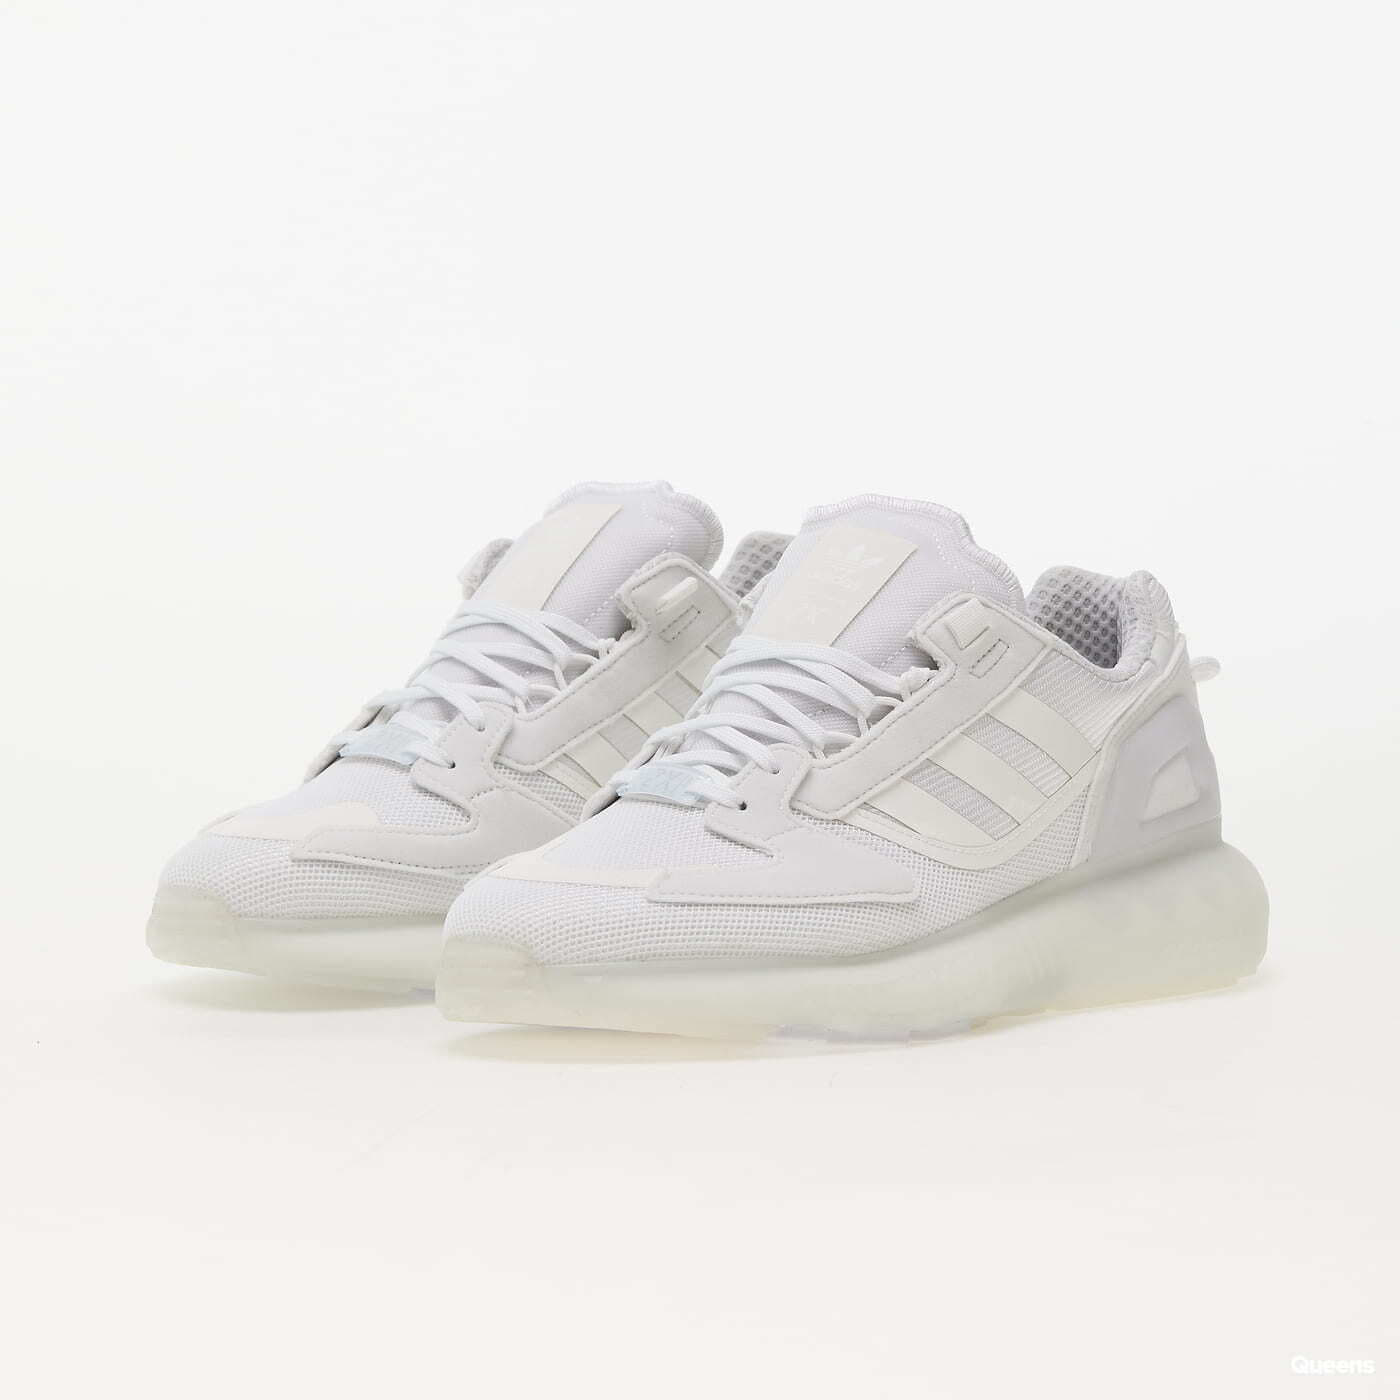 Men's sneakers and shoes adidas Originals ZX 5K Boost white/ ftw 